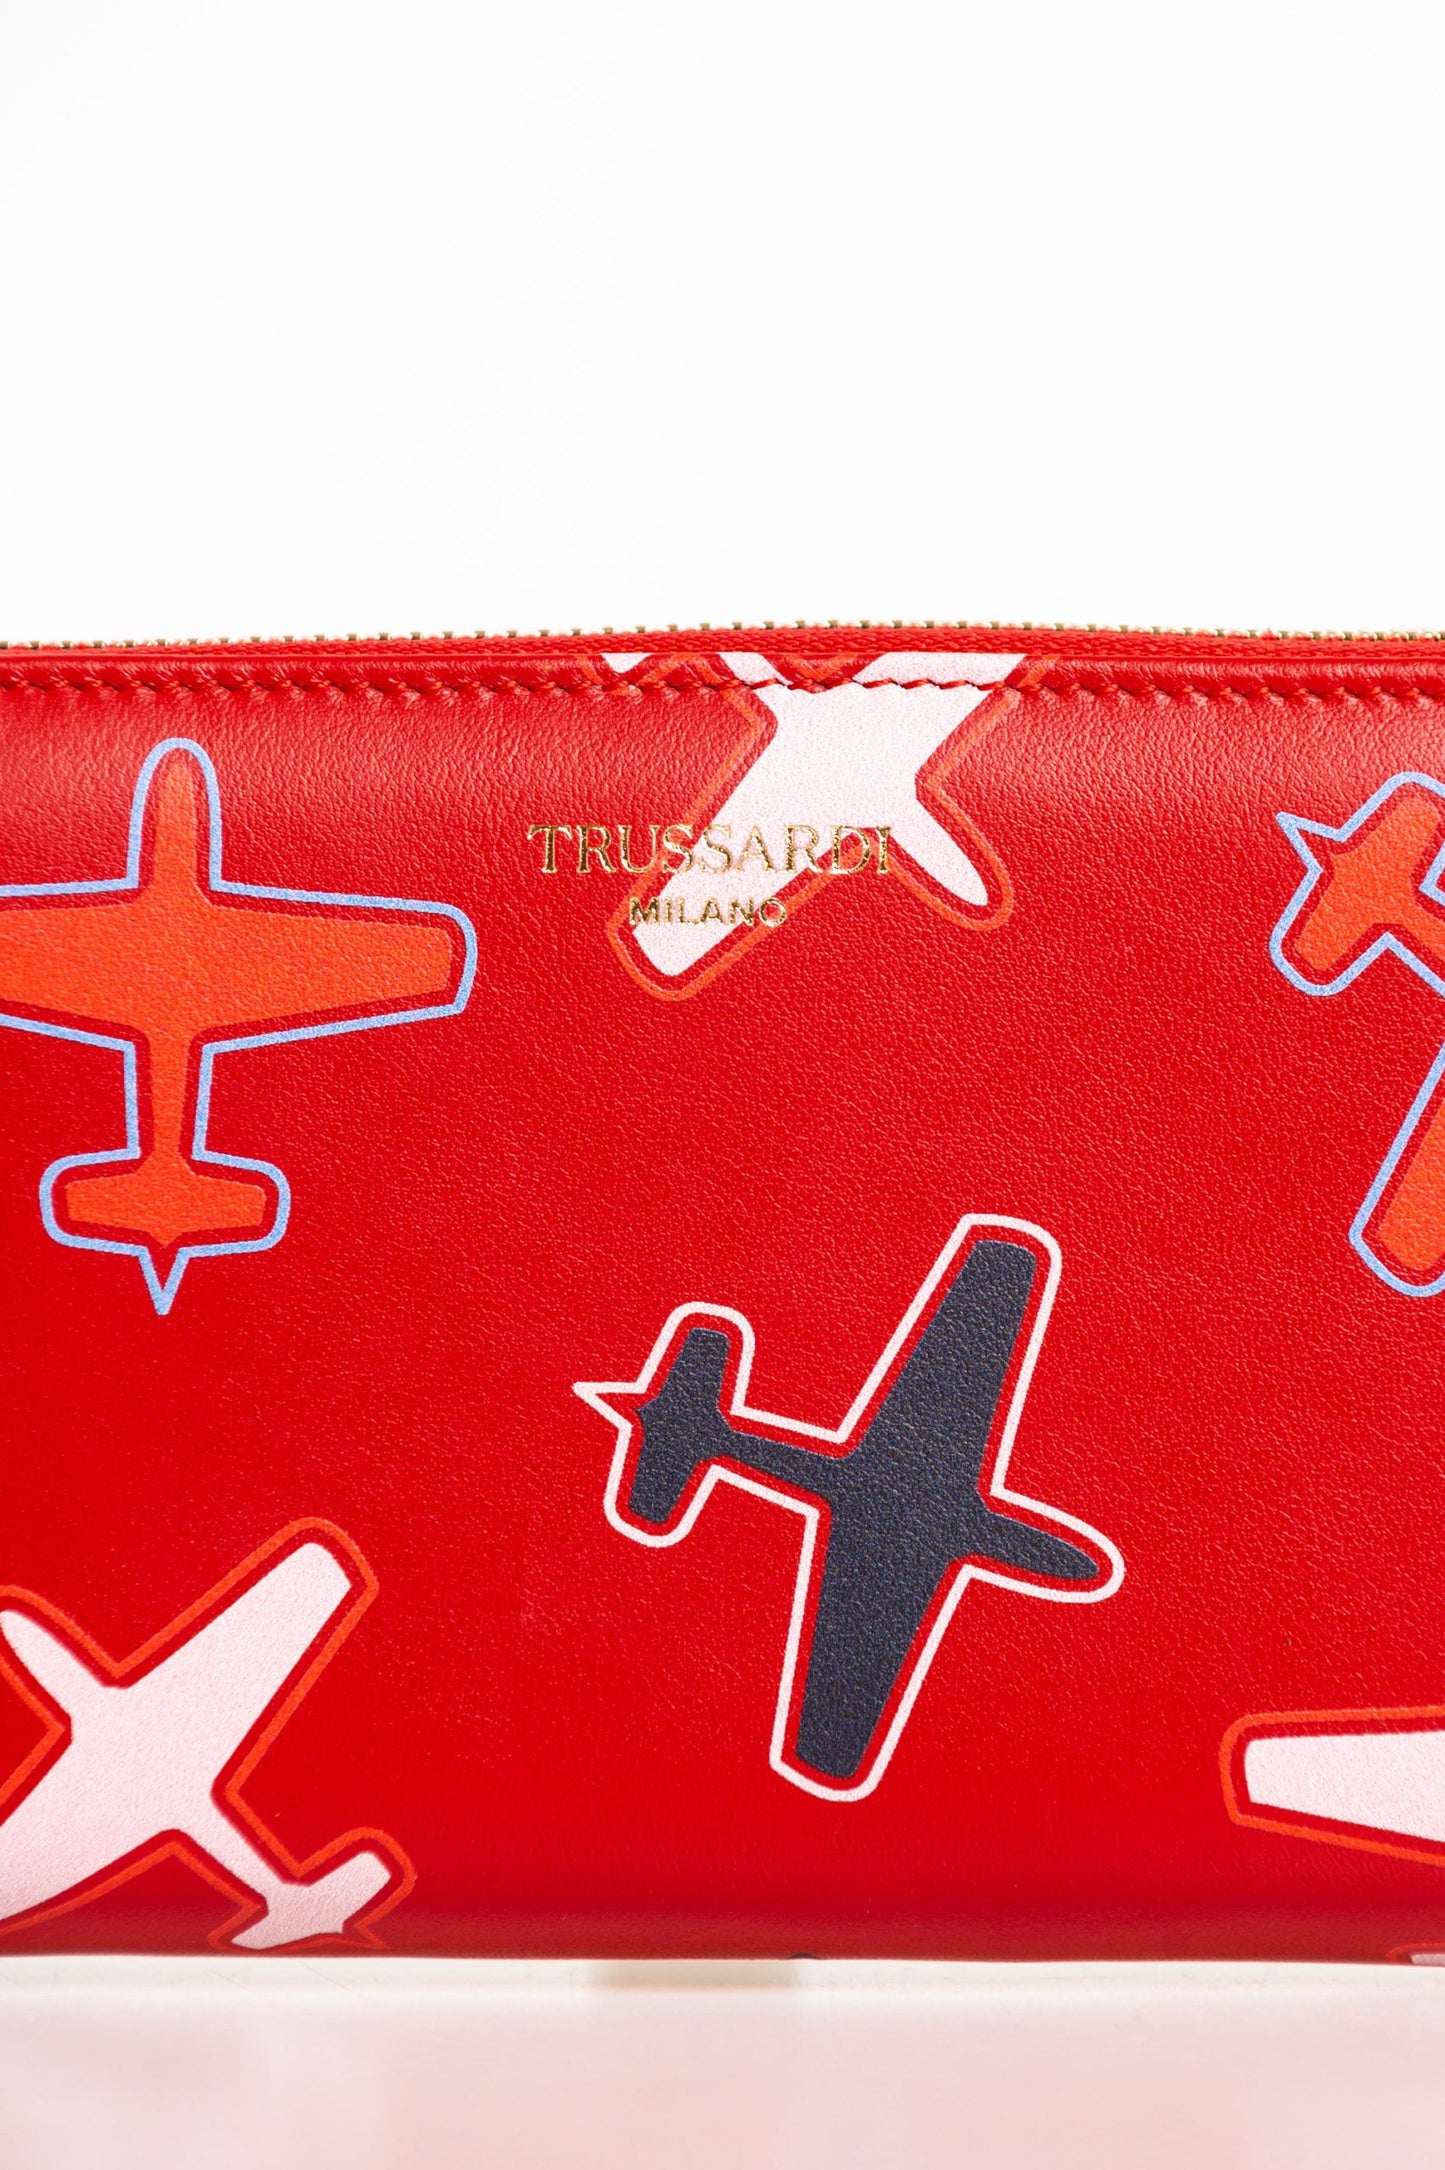 Chic Airplane Print Red Leather Wallet